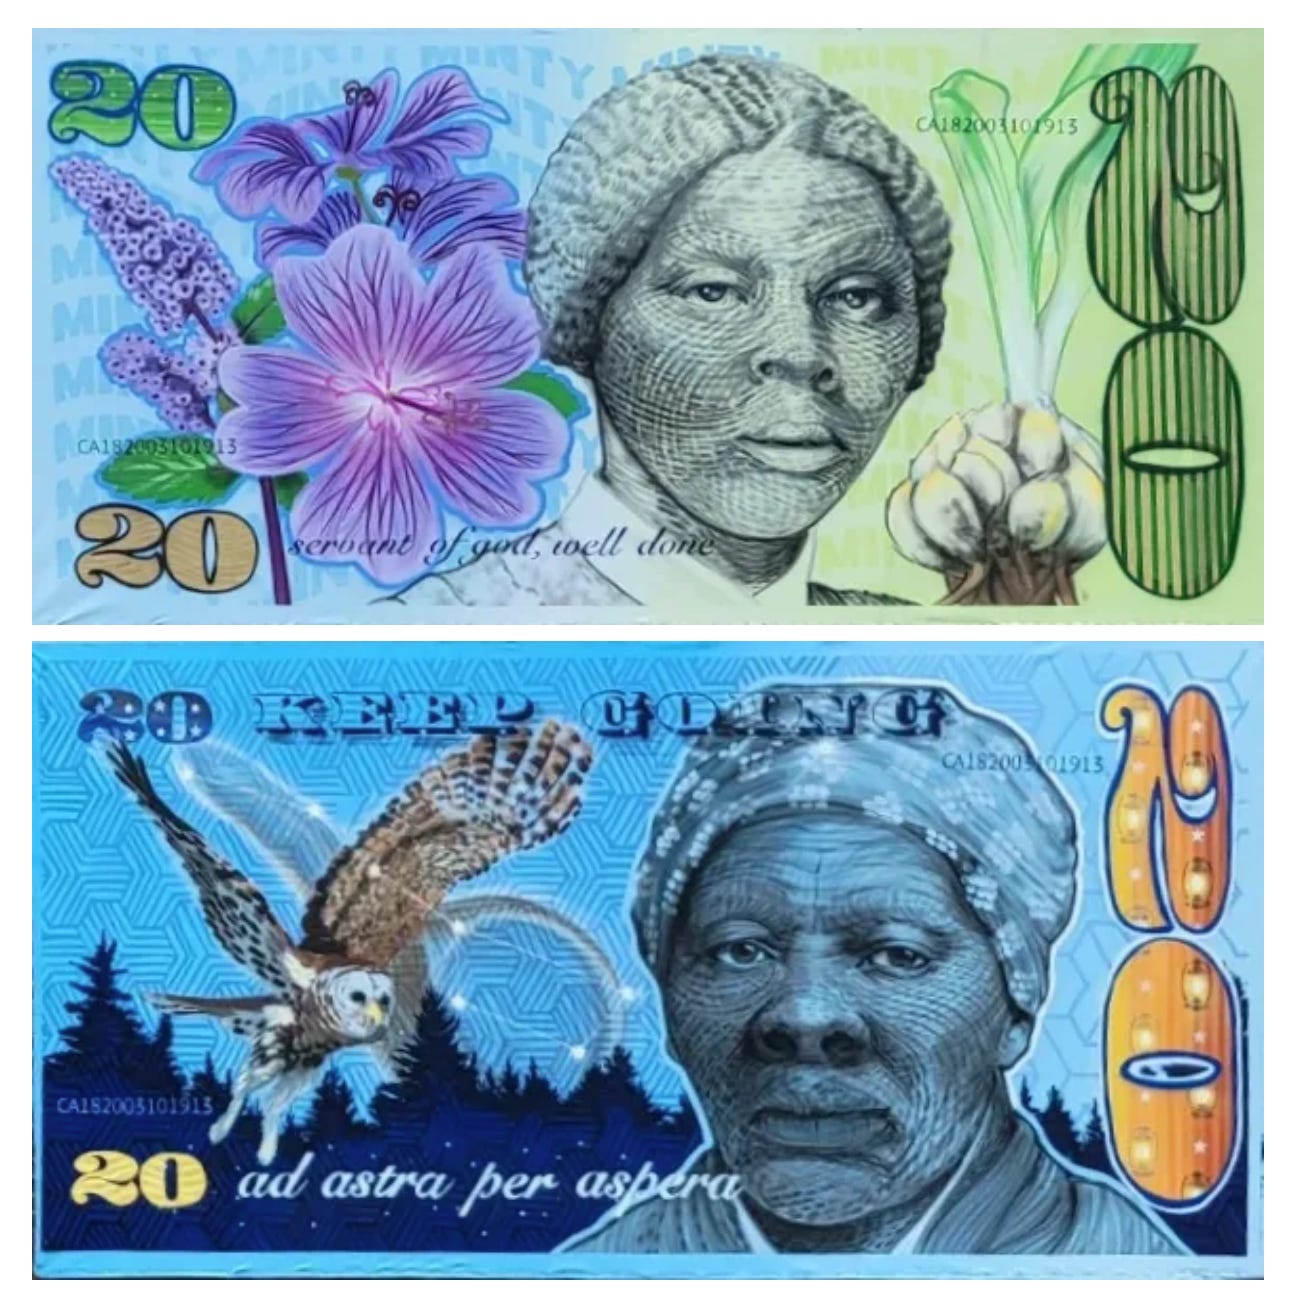 Two paintings of ideas for 20 dollar bills featuring Harriet Tubman, an idea proposed by the government in 2013 but never brought to fruition.